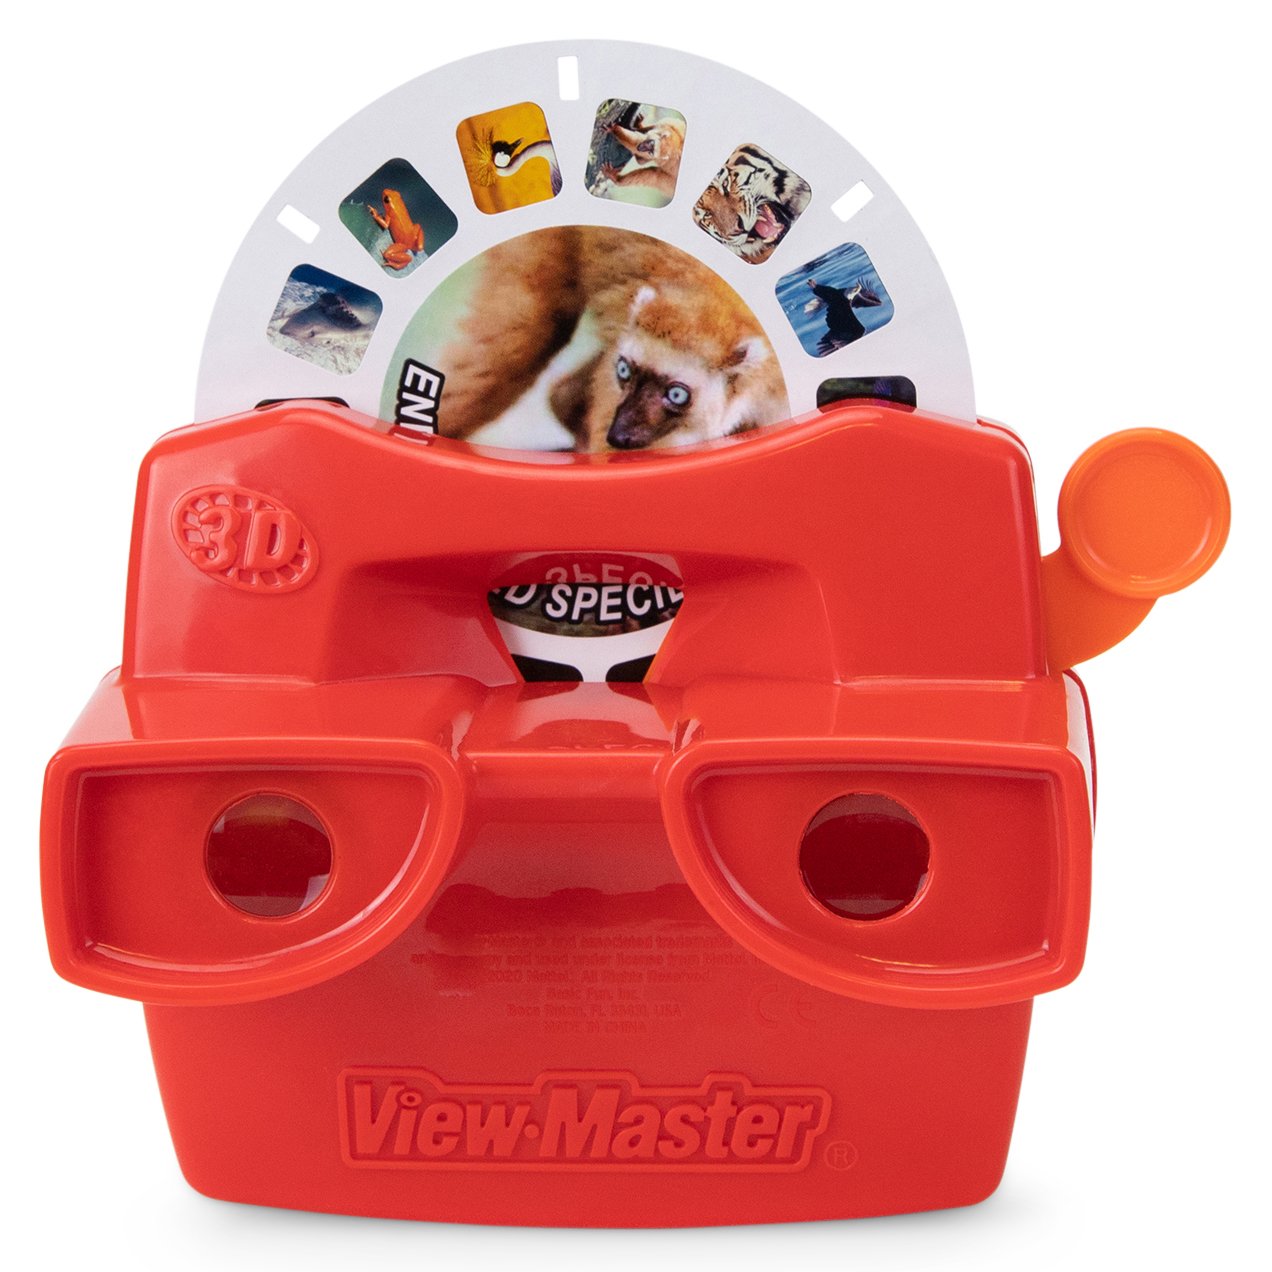 Who Else Had a View-Master?